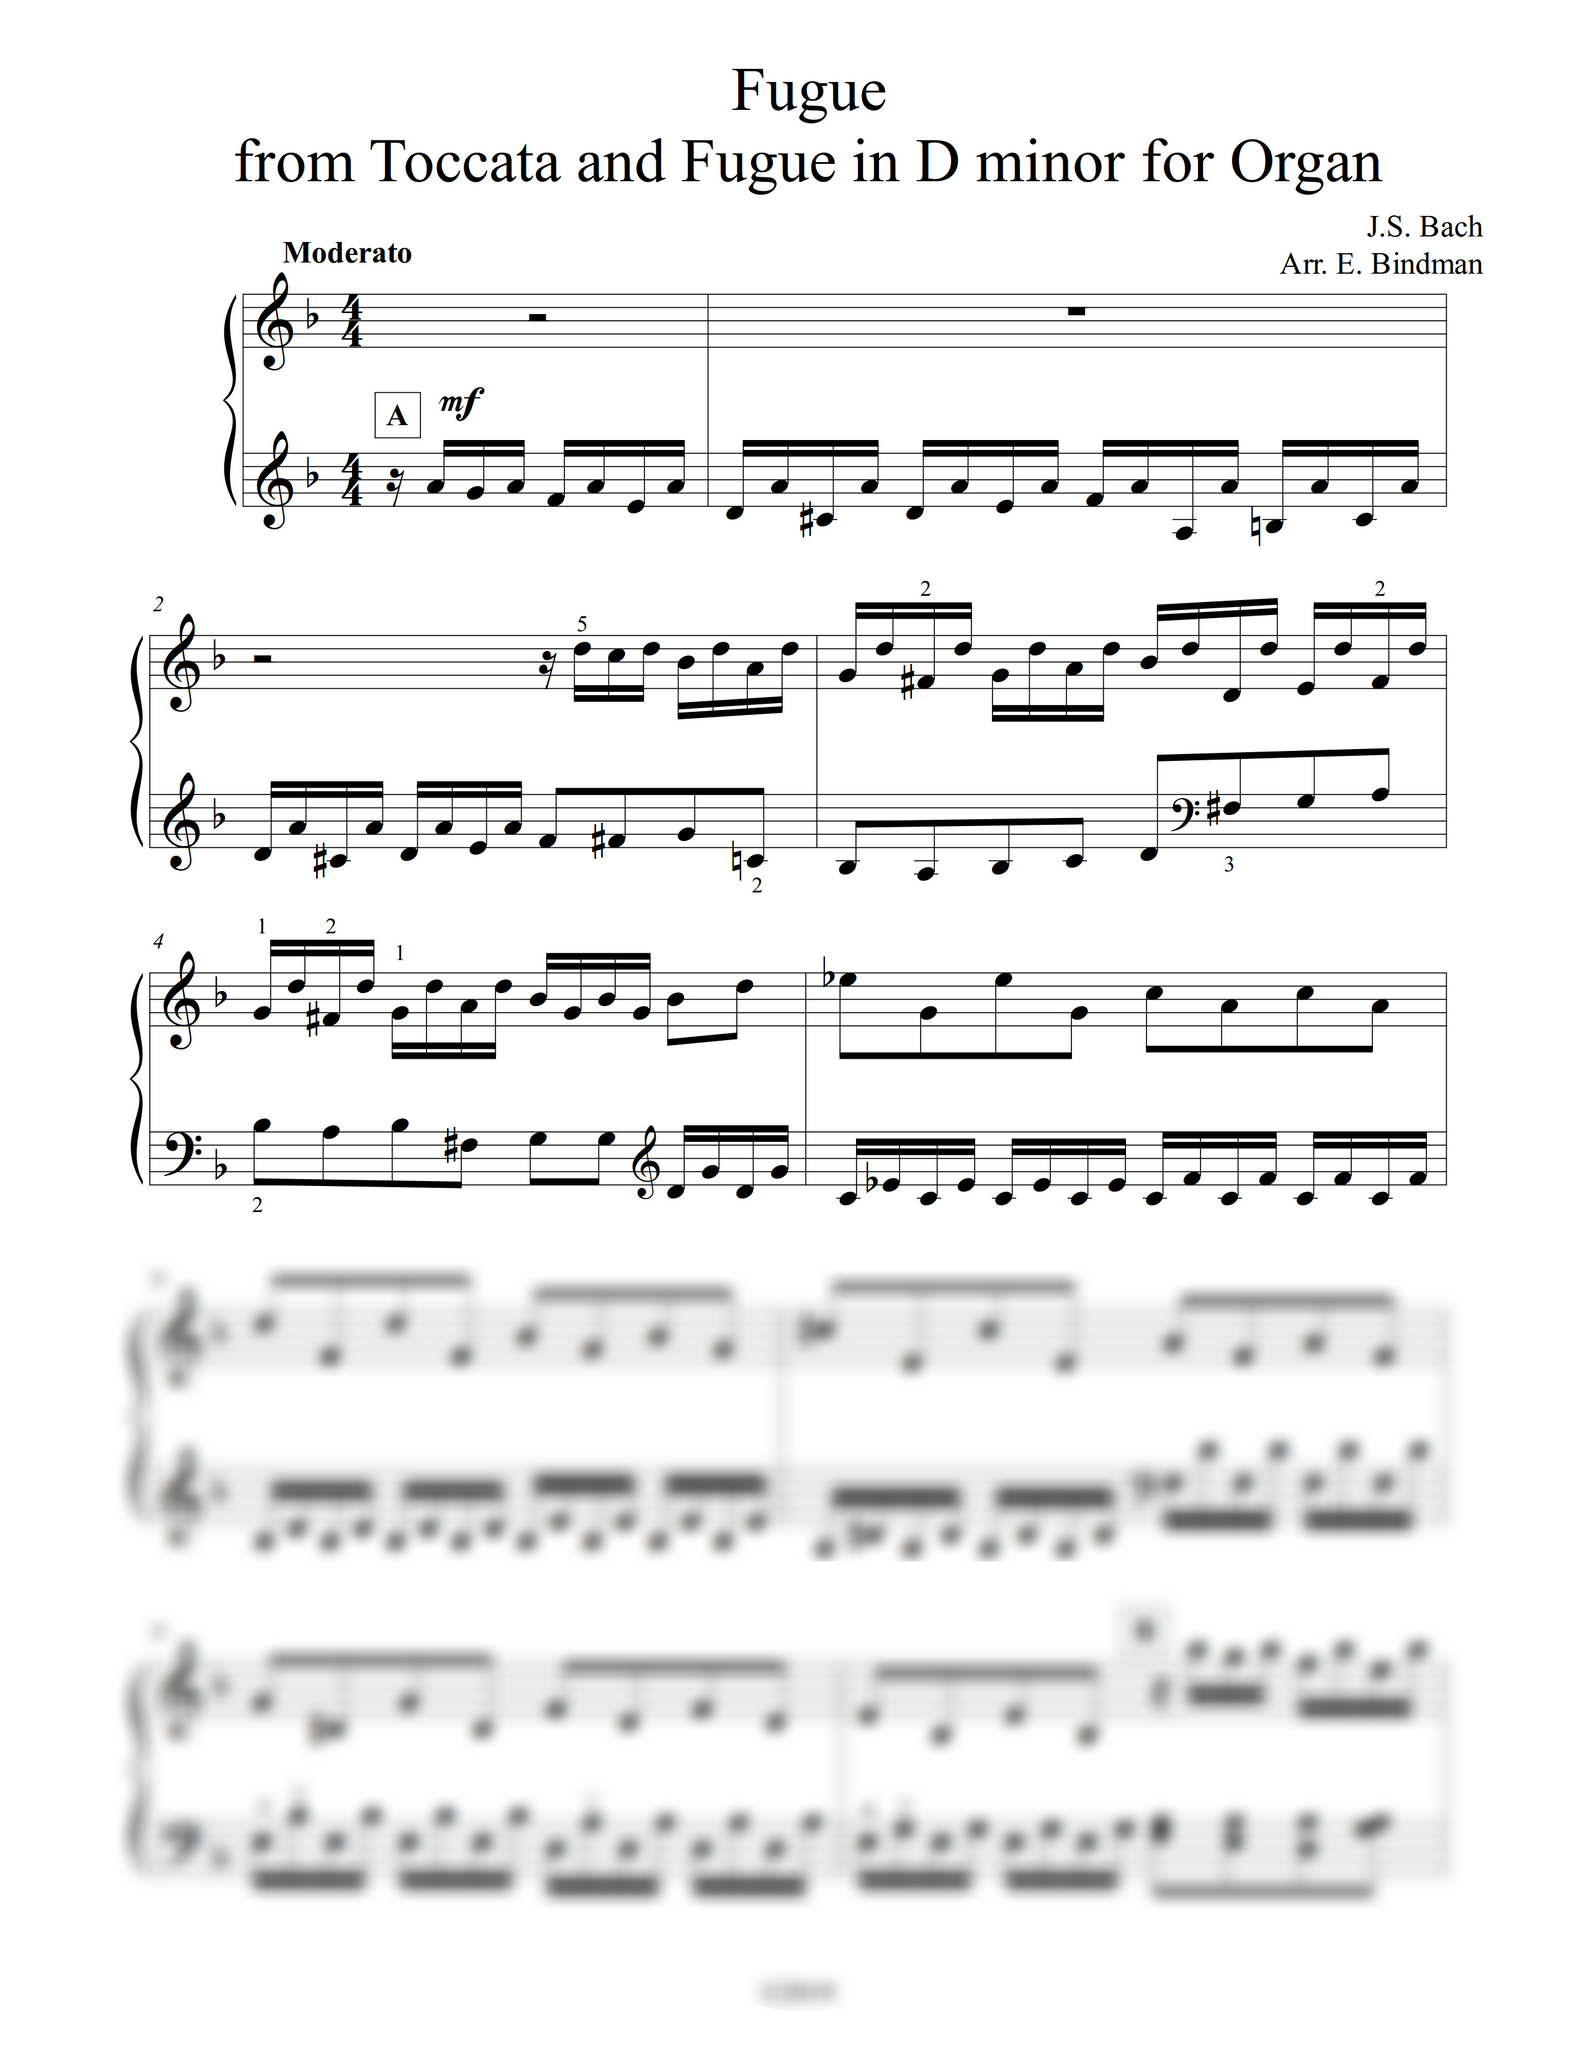 from　minor　for　piano　in　Toccata　Organ　Fugue　and　D　Bach:　Fugue